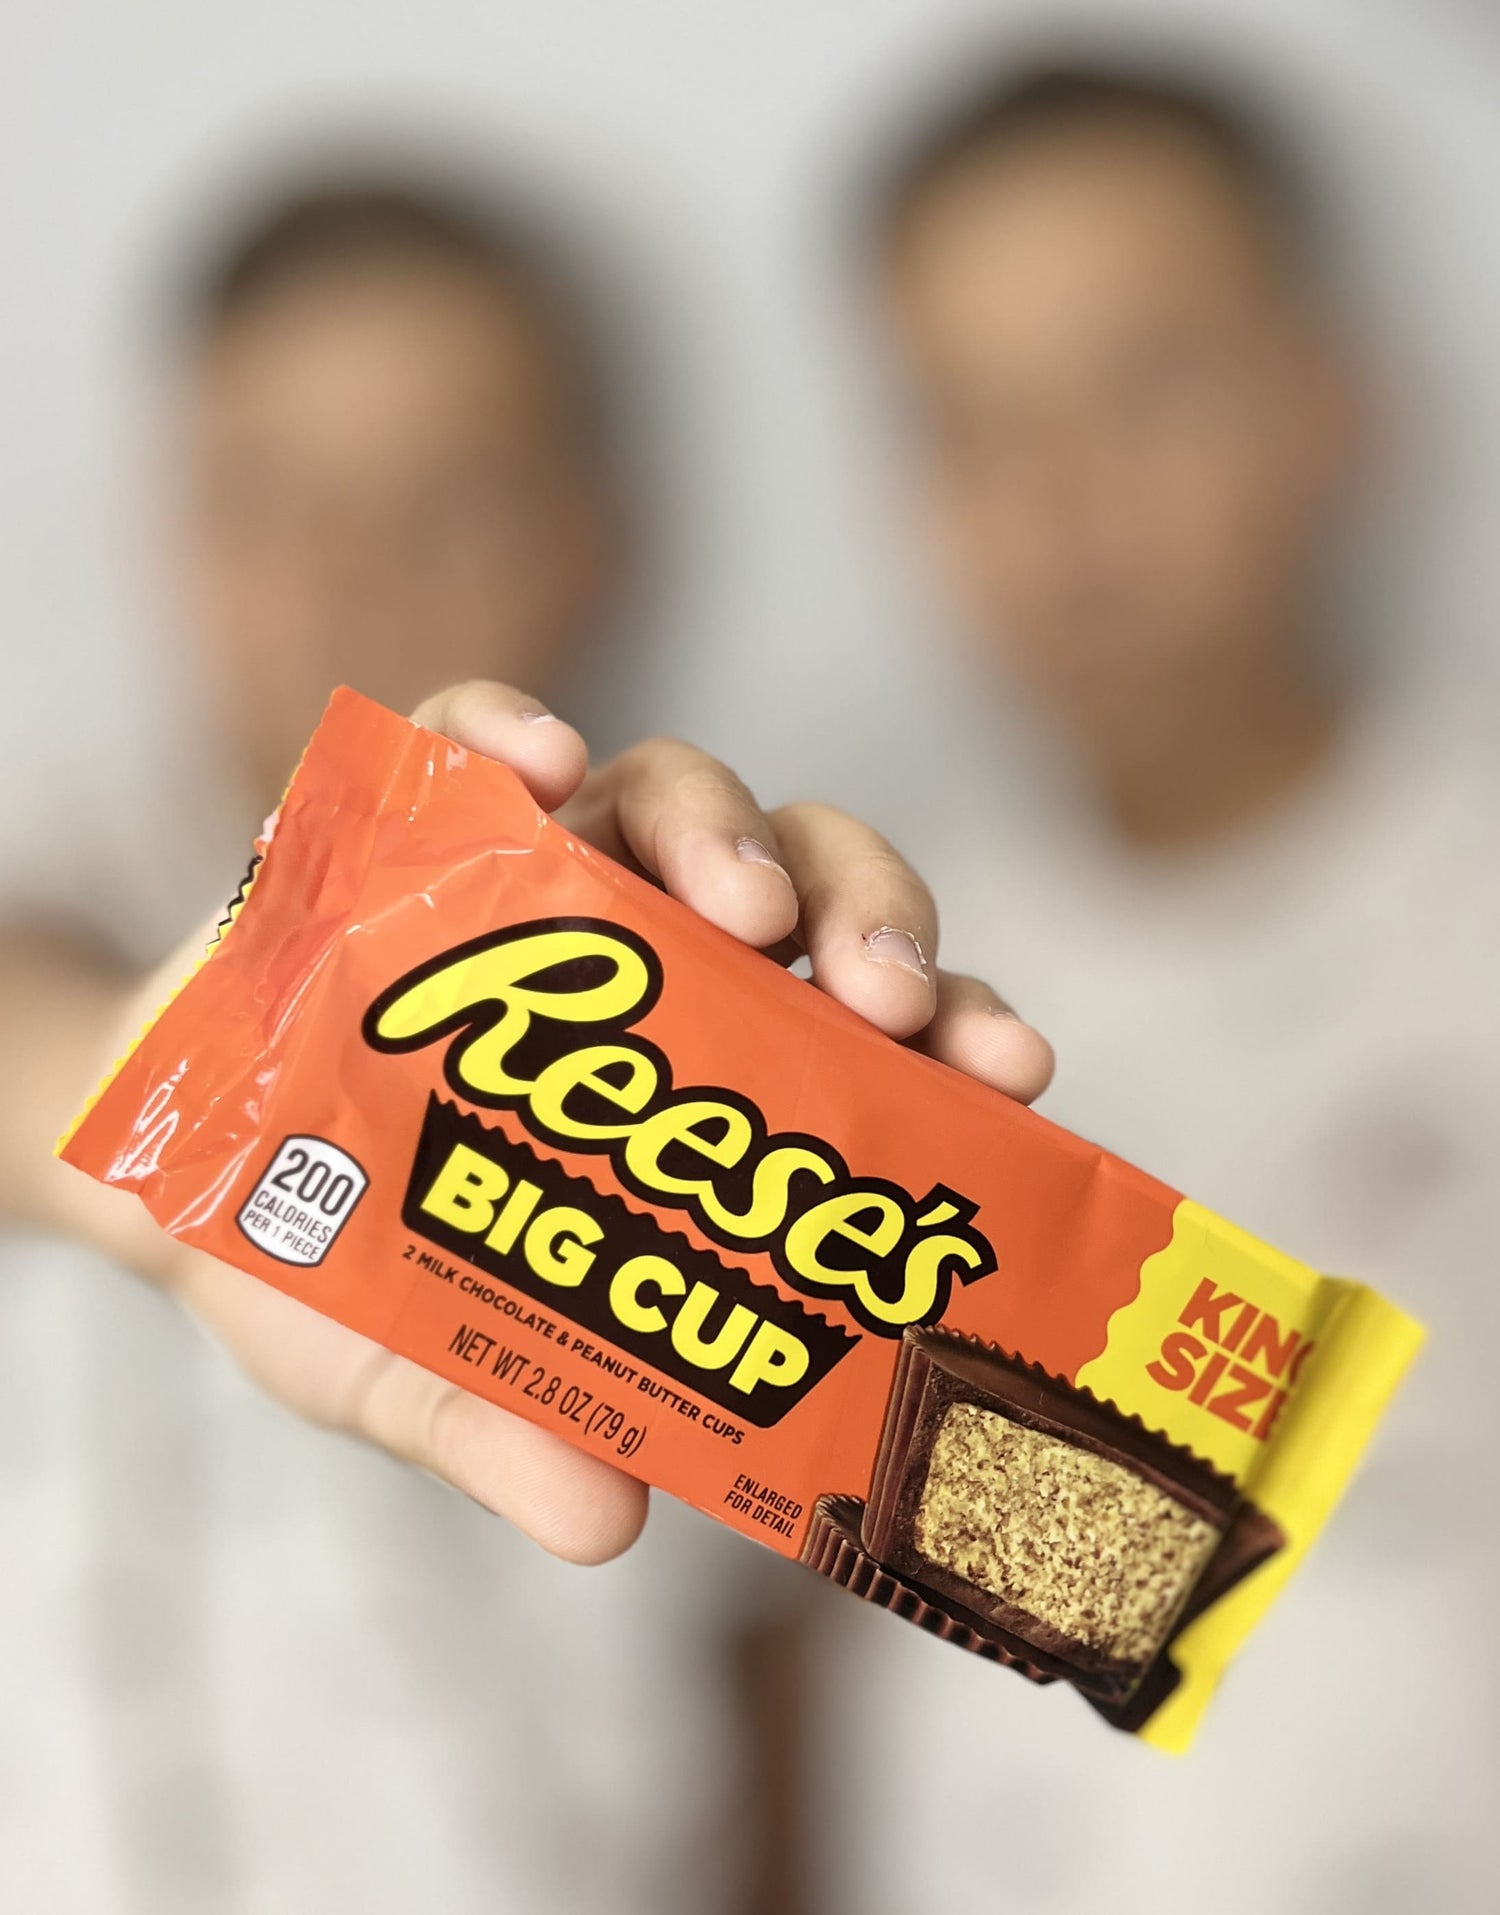 reeses-big-cup-king-size-79g